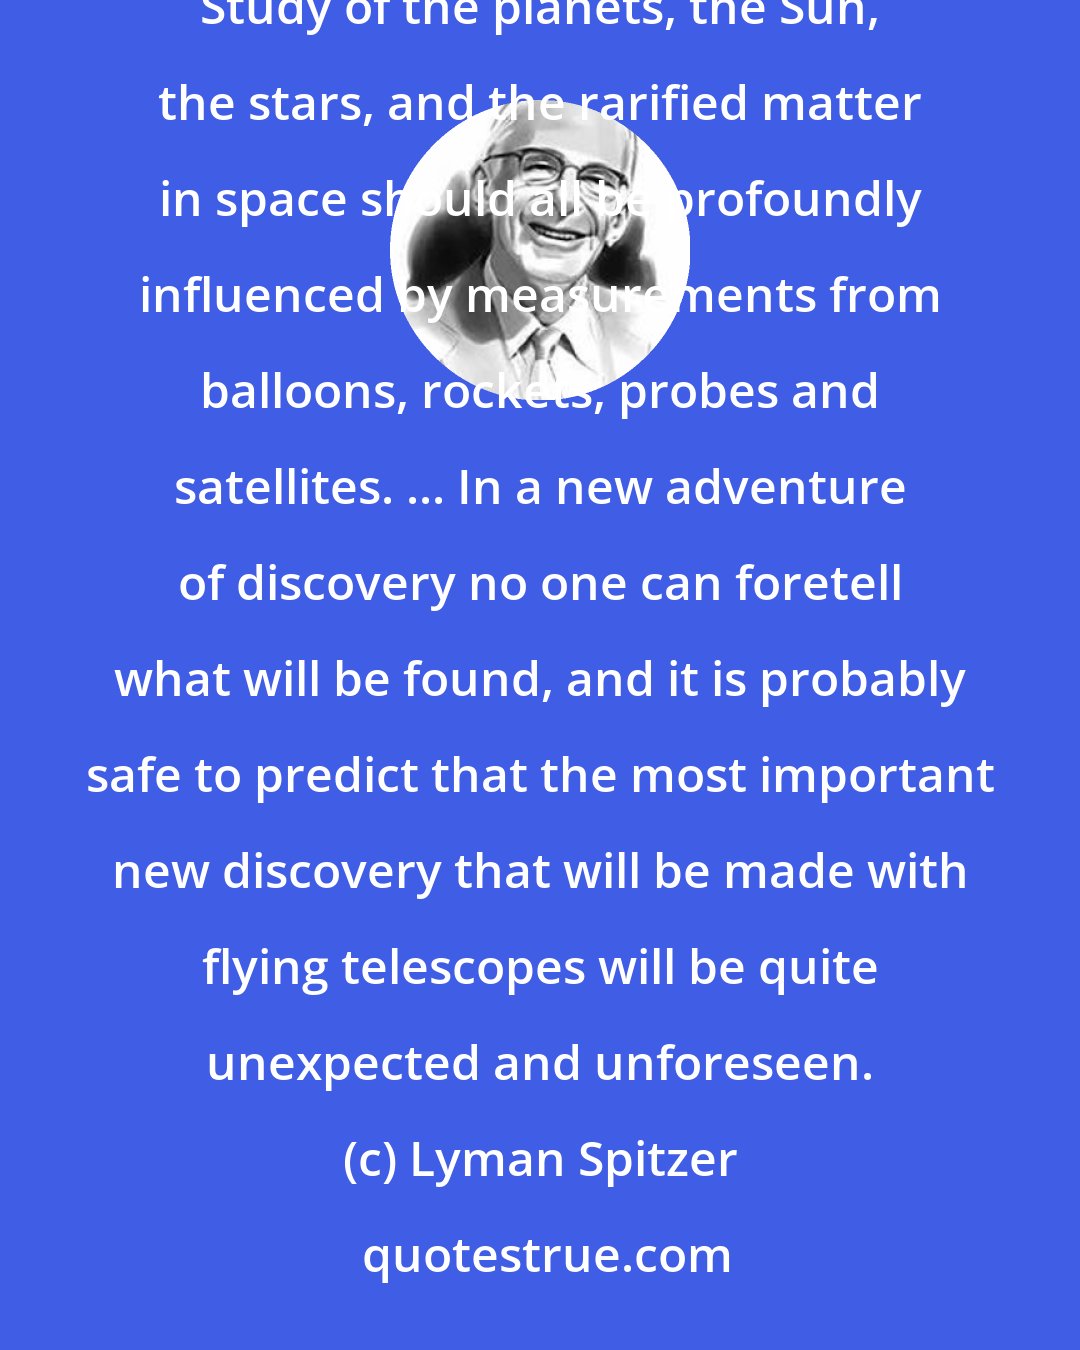 Lyman Spitzer: Astronomy may be revolutionized more than any other field of science by observations from above the atmosphere. Study of the planets, the Sun, the stars, and the rarified matter in space should all be profoundly influenced by measurements from balloons, rockets, probes and satellites. ... In a new adventure of discovery no one can foretell what will be found, and it is probably safe to predict that the most important new discovery that will be made with flying telescopes will be quite unexpected and unforeseen.